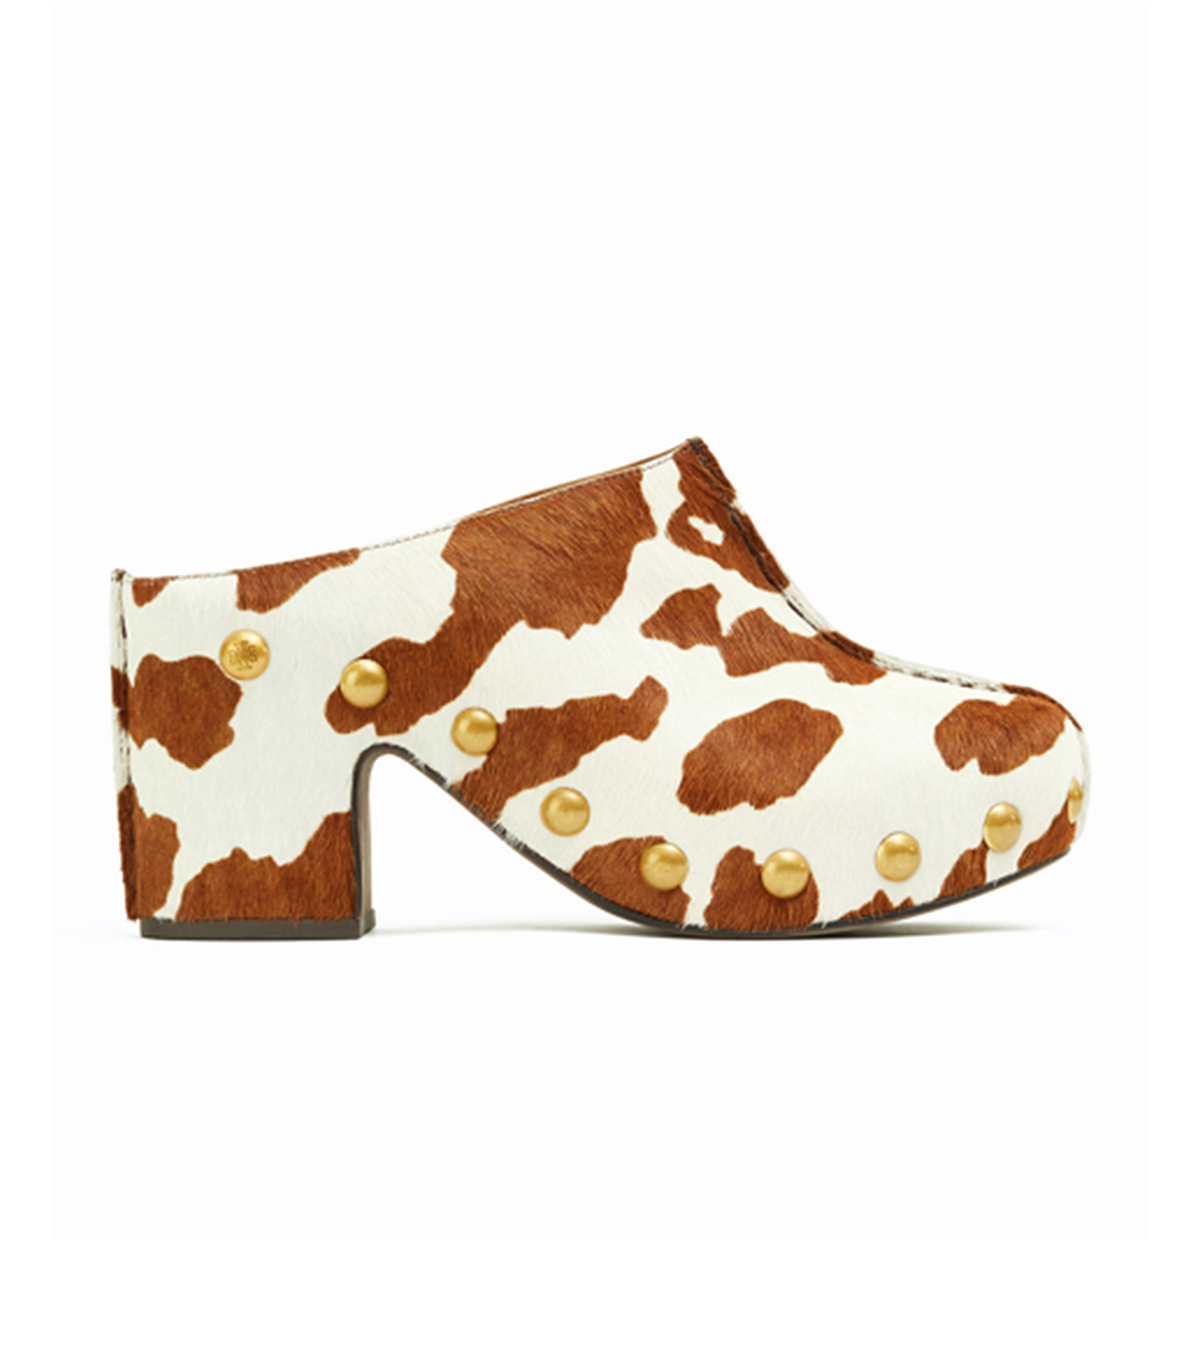 Clogs Are Trending—Here Are 19 of the Best Pairs | Who What Wear